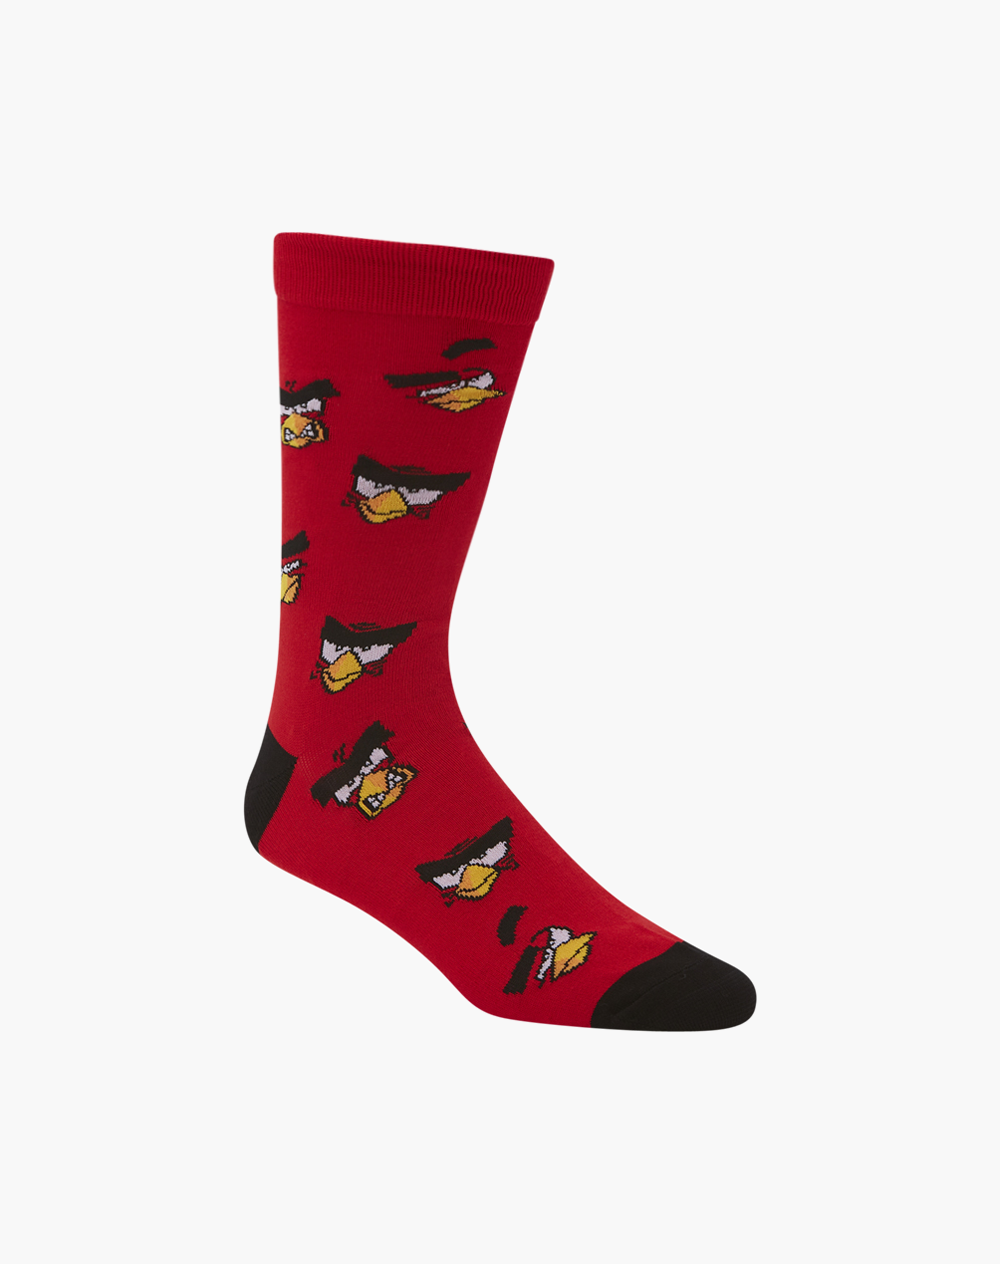 MENS ANGRY BIRDS RED BAMBOO SOCK